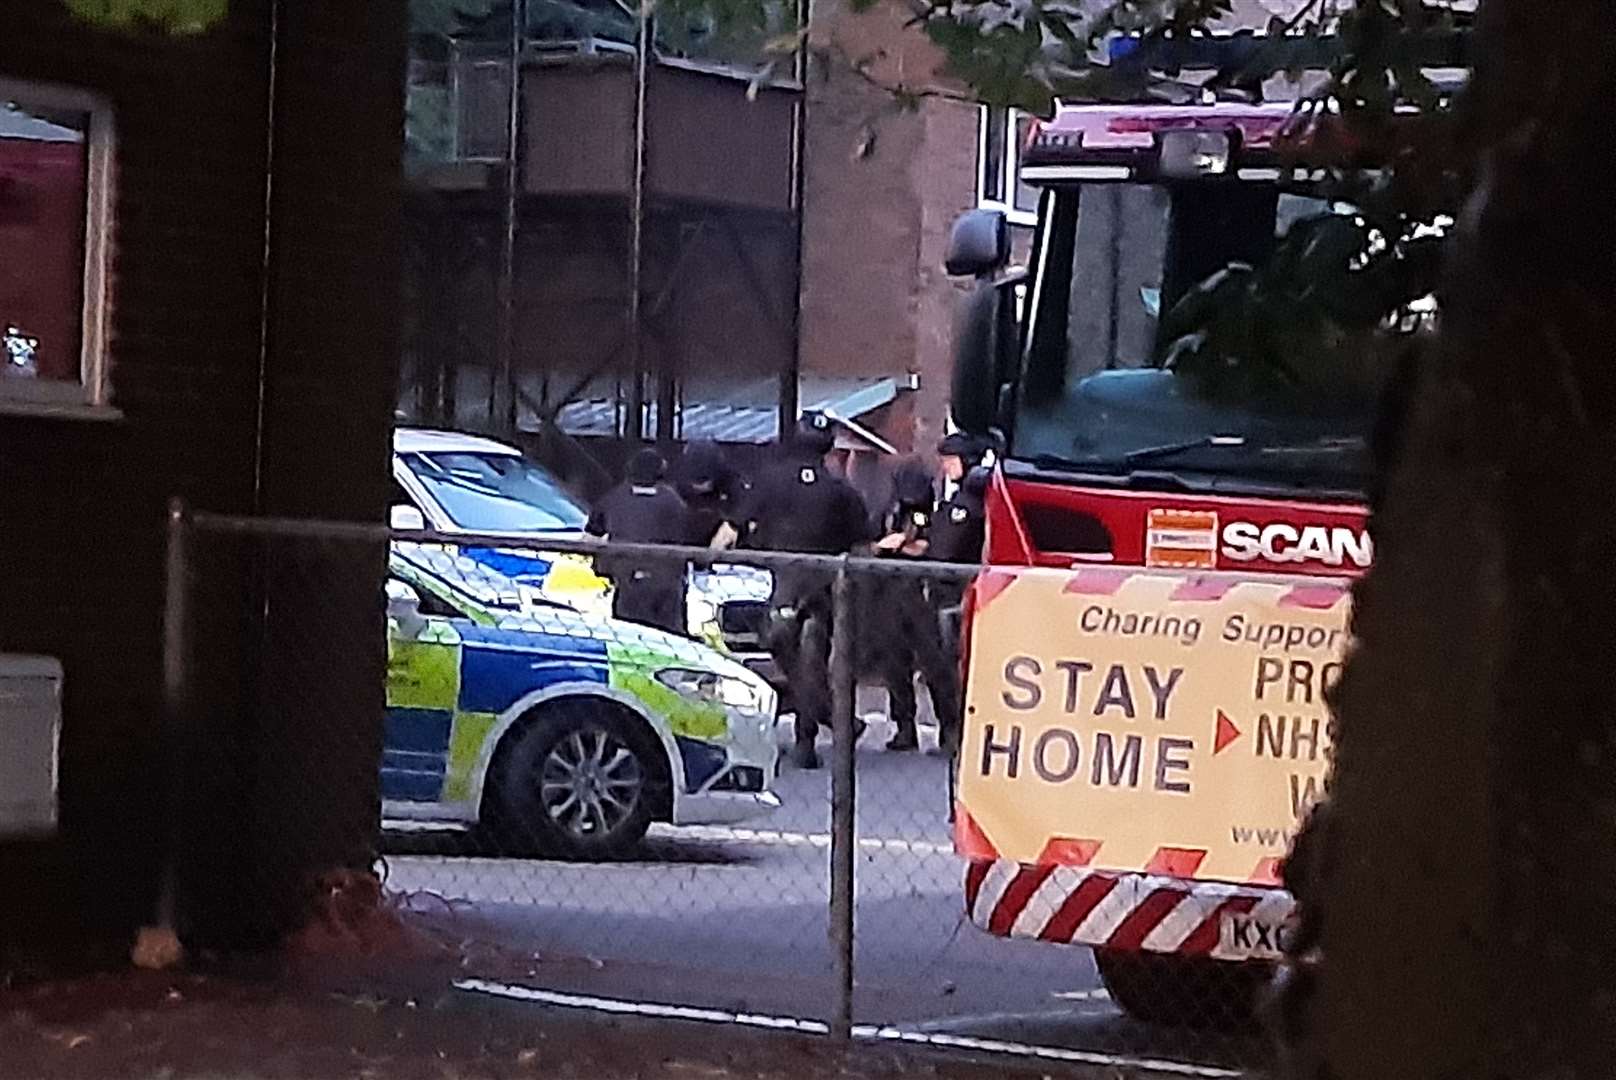 Armed police in Charing on Sunday evening